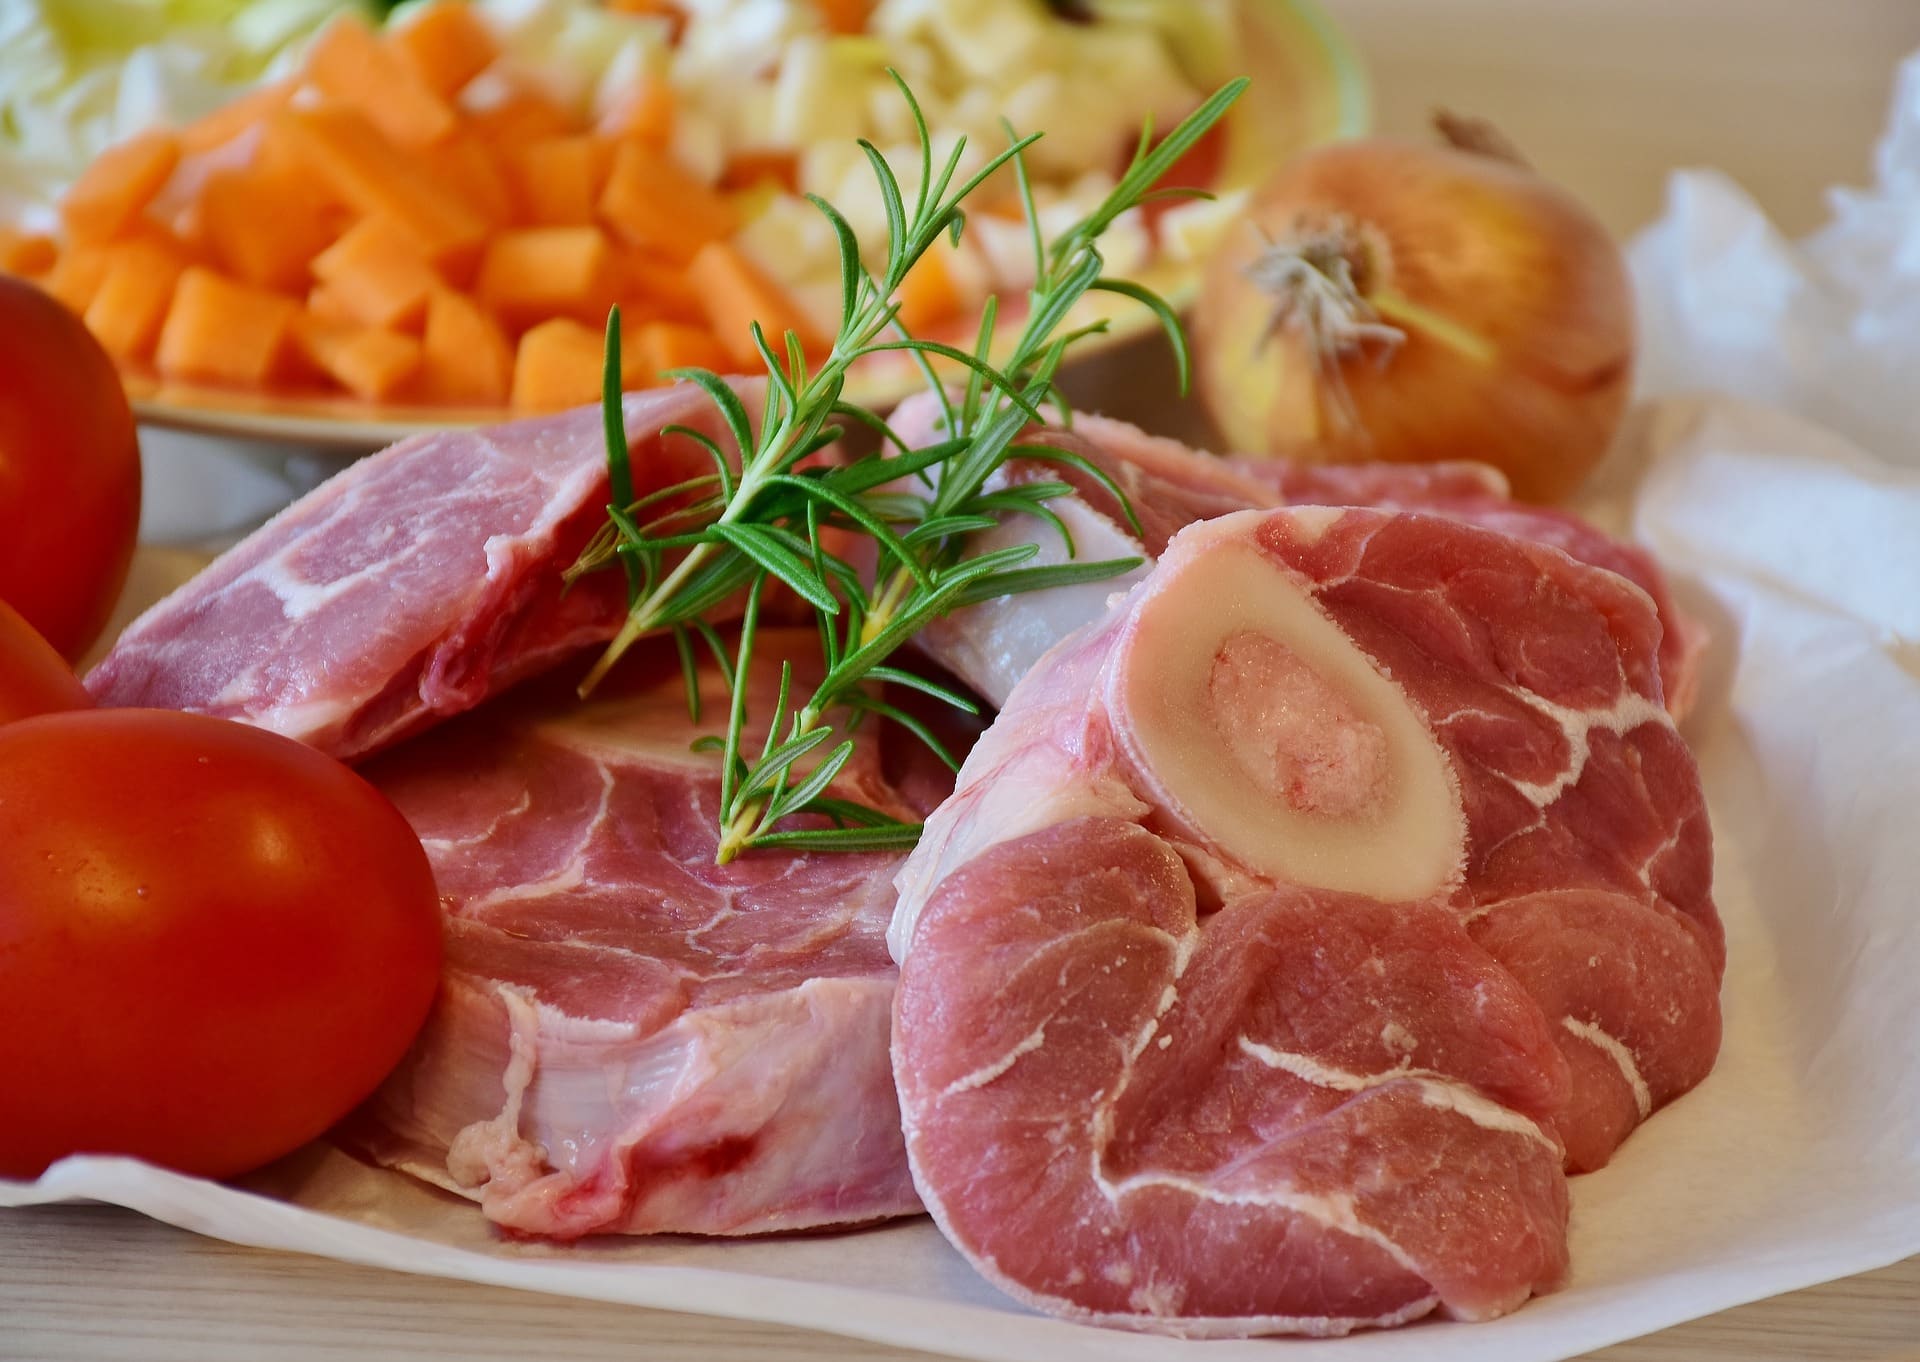 Raw osso buco and ingredients image